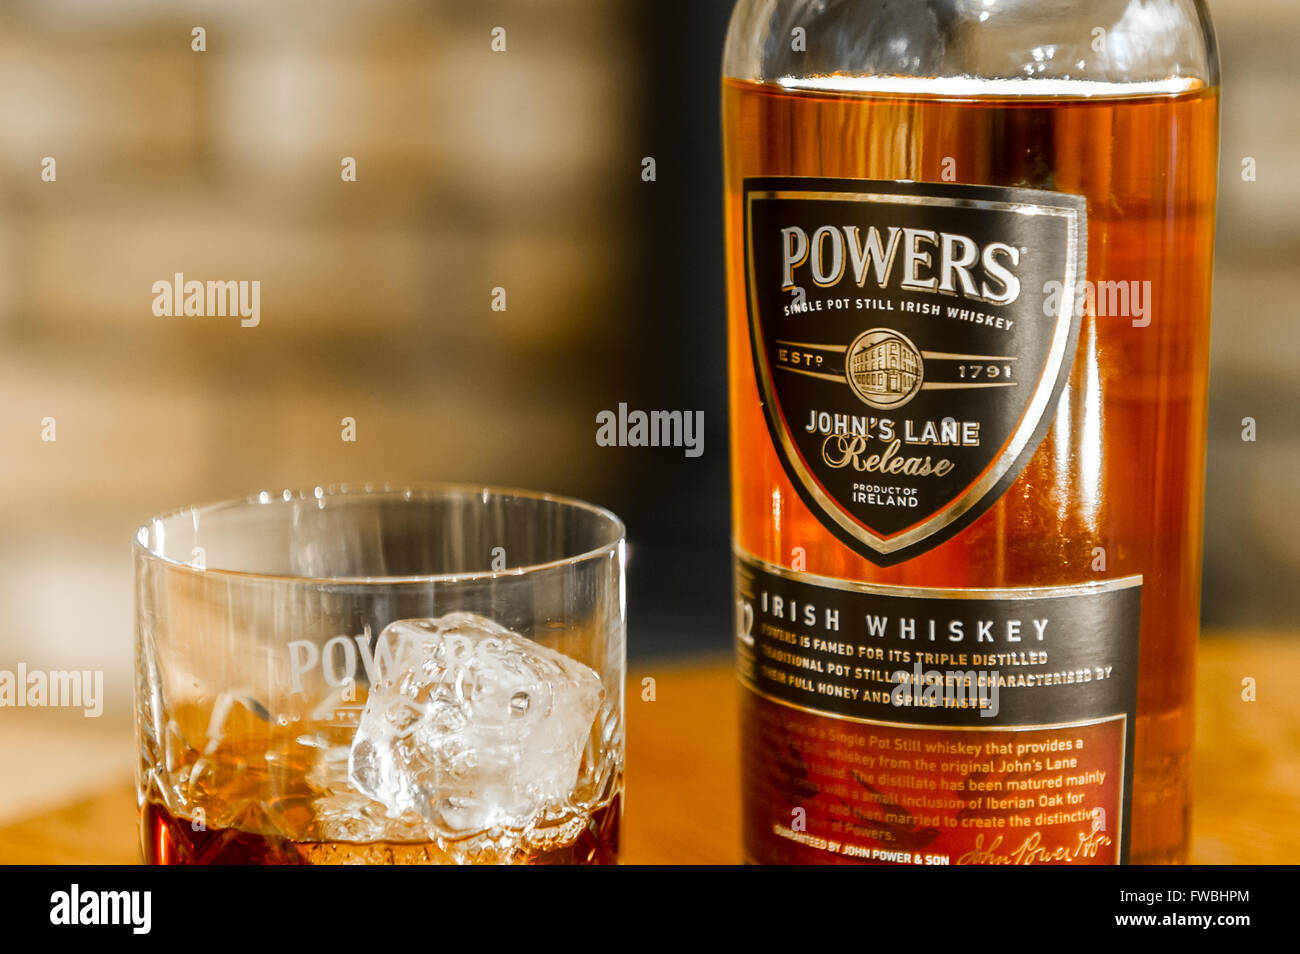 A bottle of Powers single pot still Irish whiskey with a glass of whiskey with ice cubes. Stock Photo